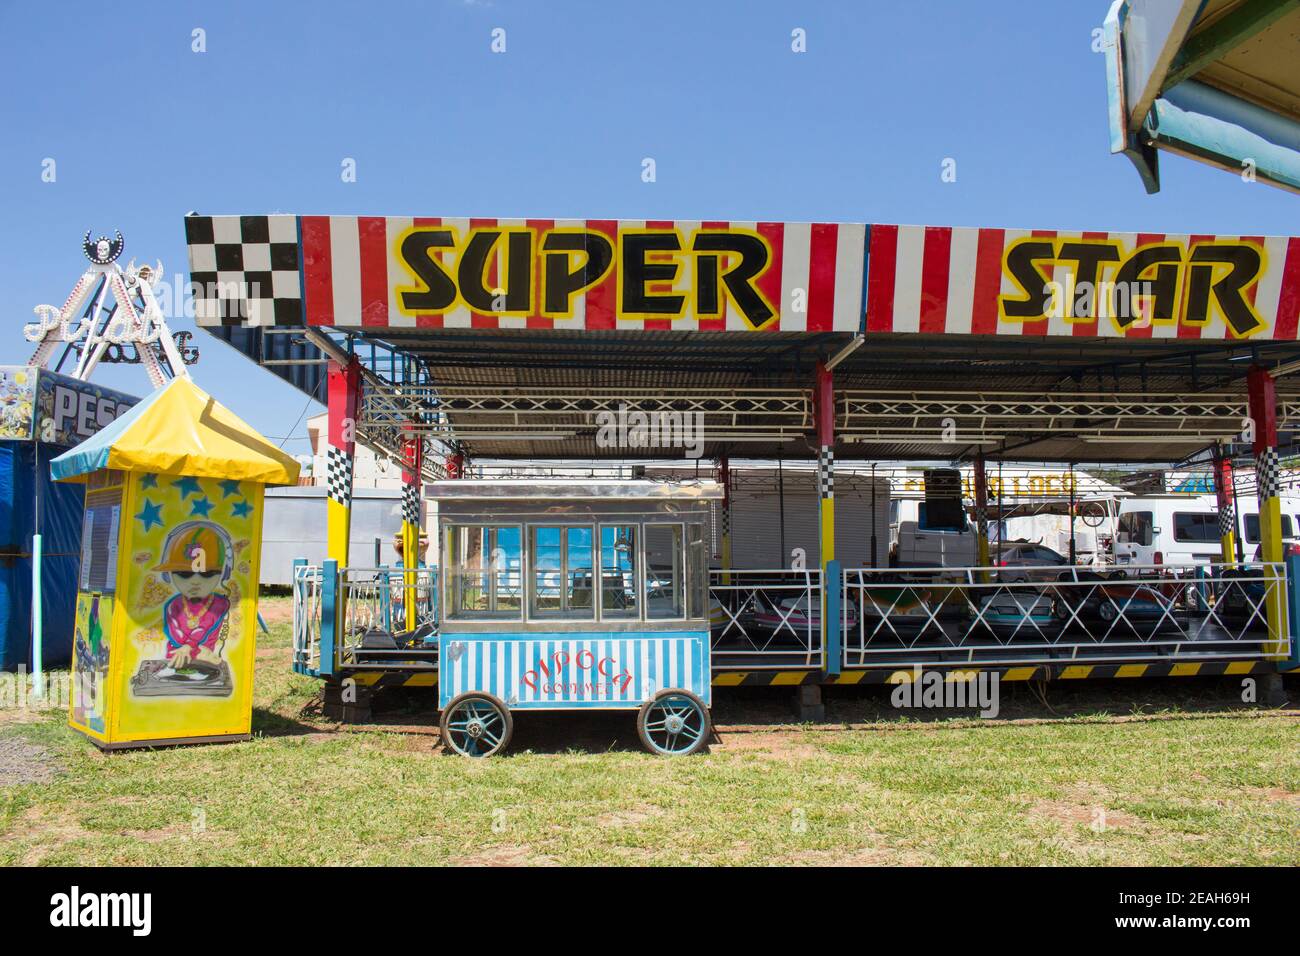 Ibitinga, SP, Brazil - 02 07 2021: A vintage popcorn cart in front of a Bumper Cars Ride at an Amusement Park Stock Photo